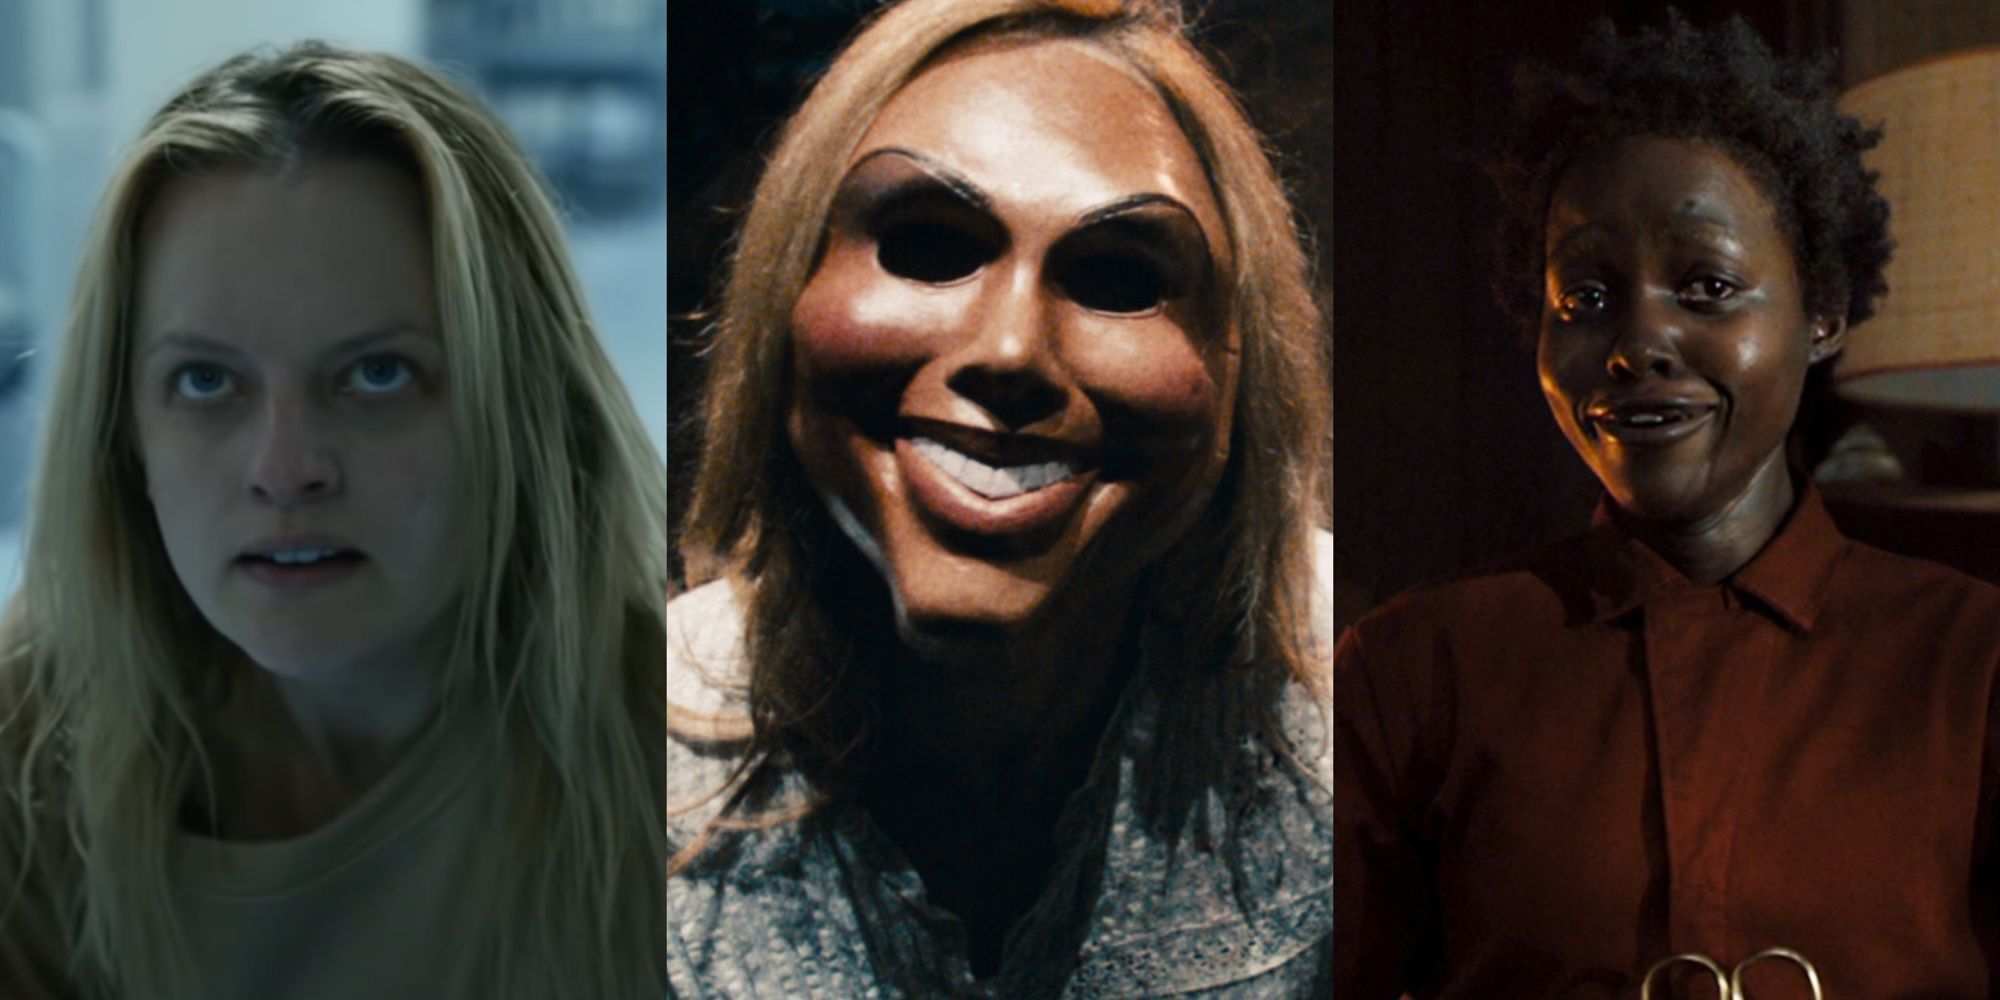 The Invisible Man, The Purge and Us